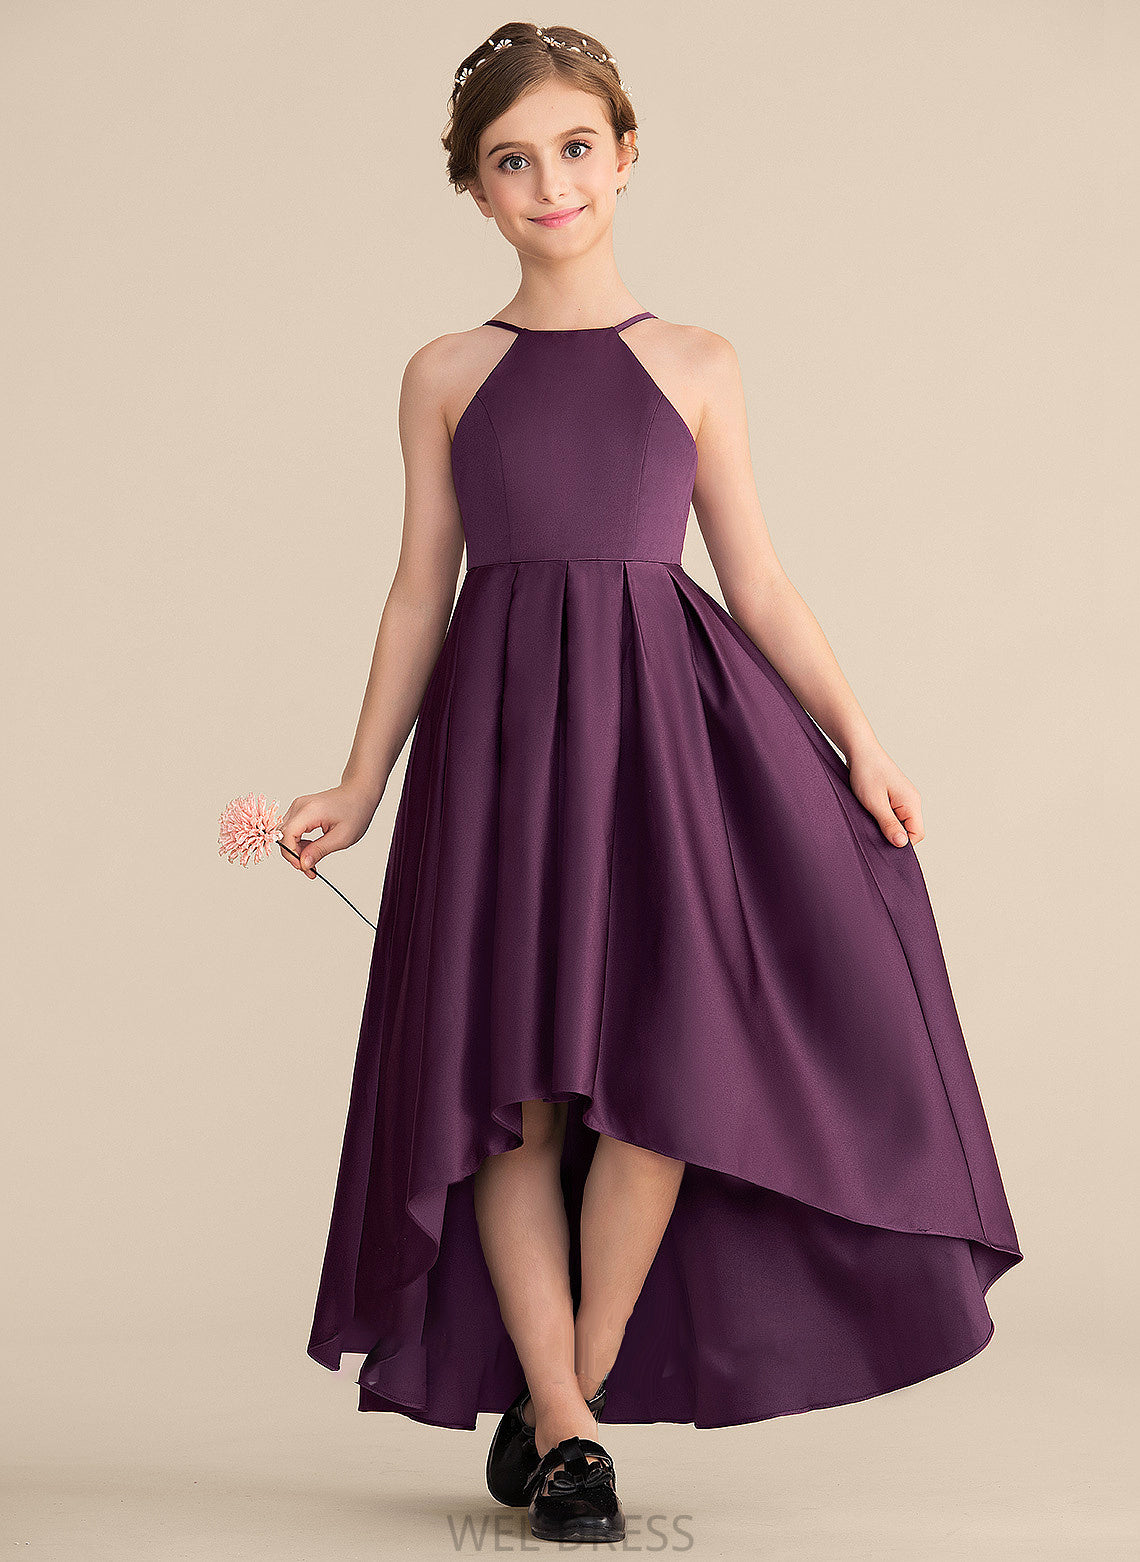 A-Line Junior Bridesmaid Dresses Satin Neck Ruffle Marilyn Scoop Asymmetrical With